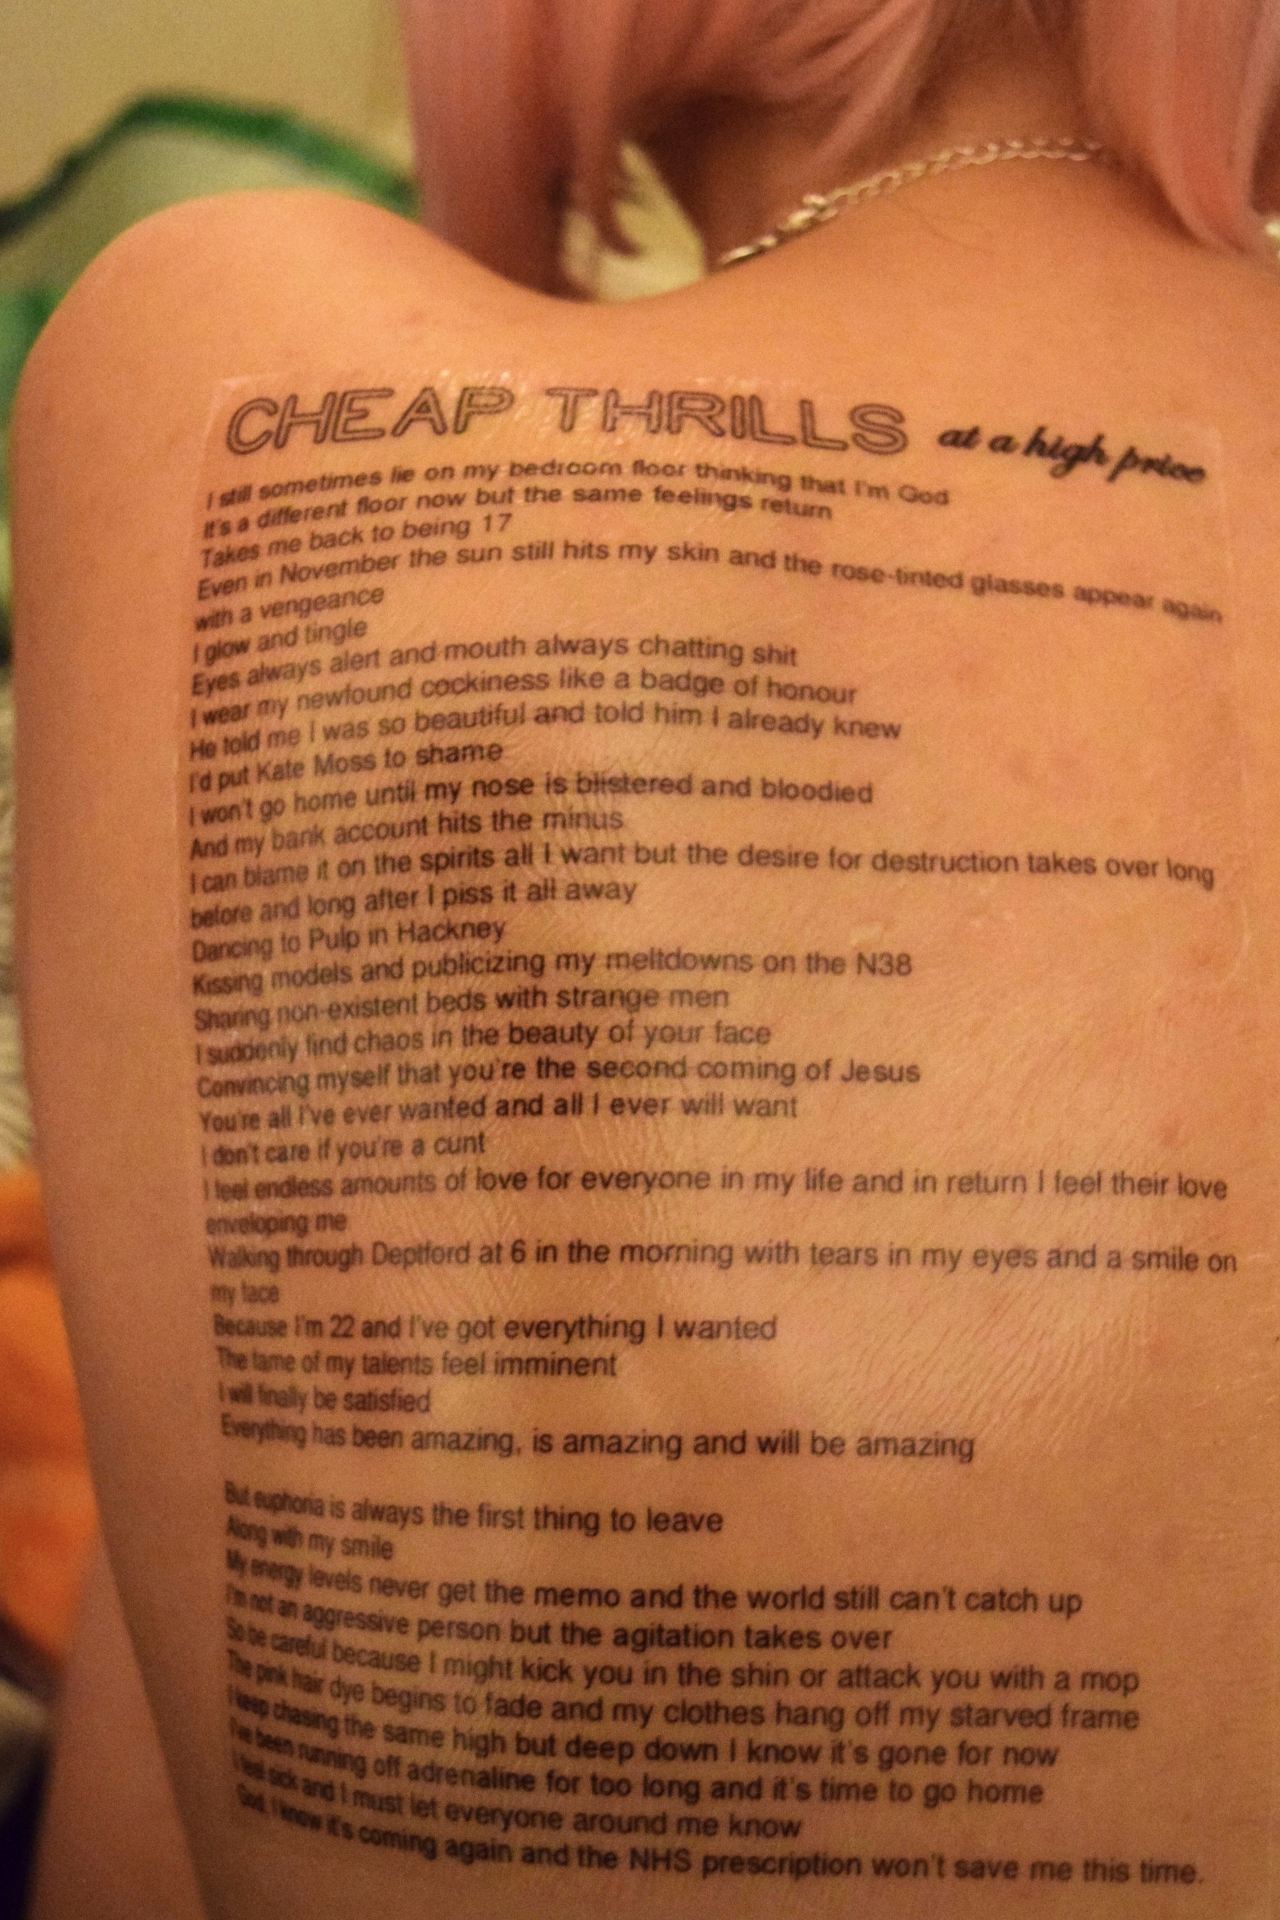 An image of a woman's back covered in black lines of text.